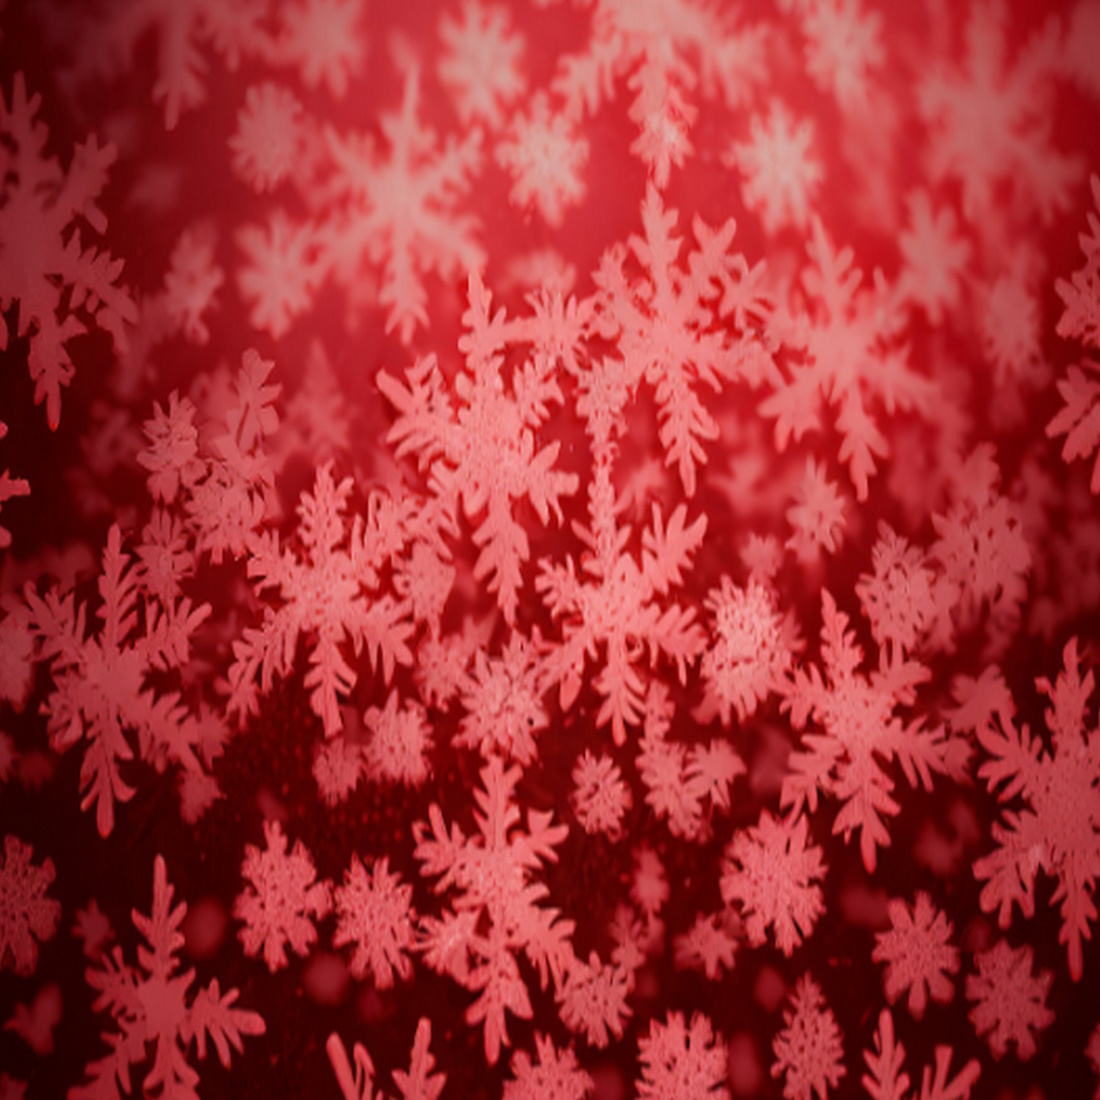 red snow flakes background texture1 39